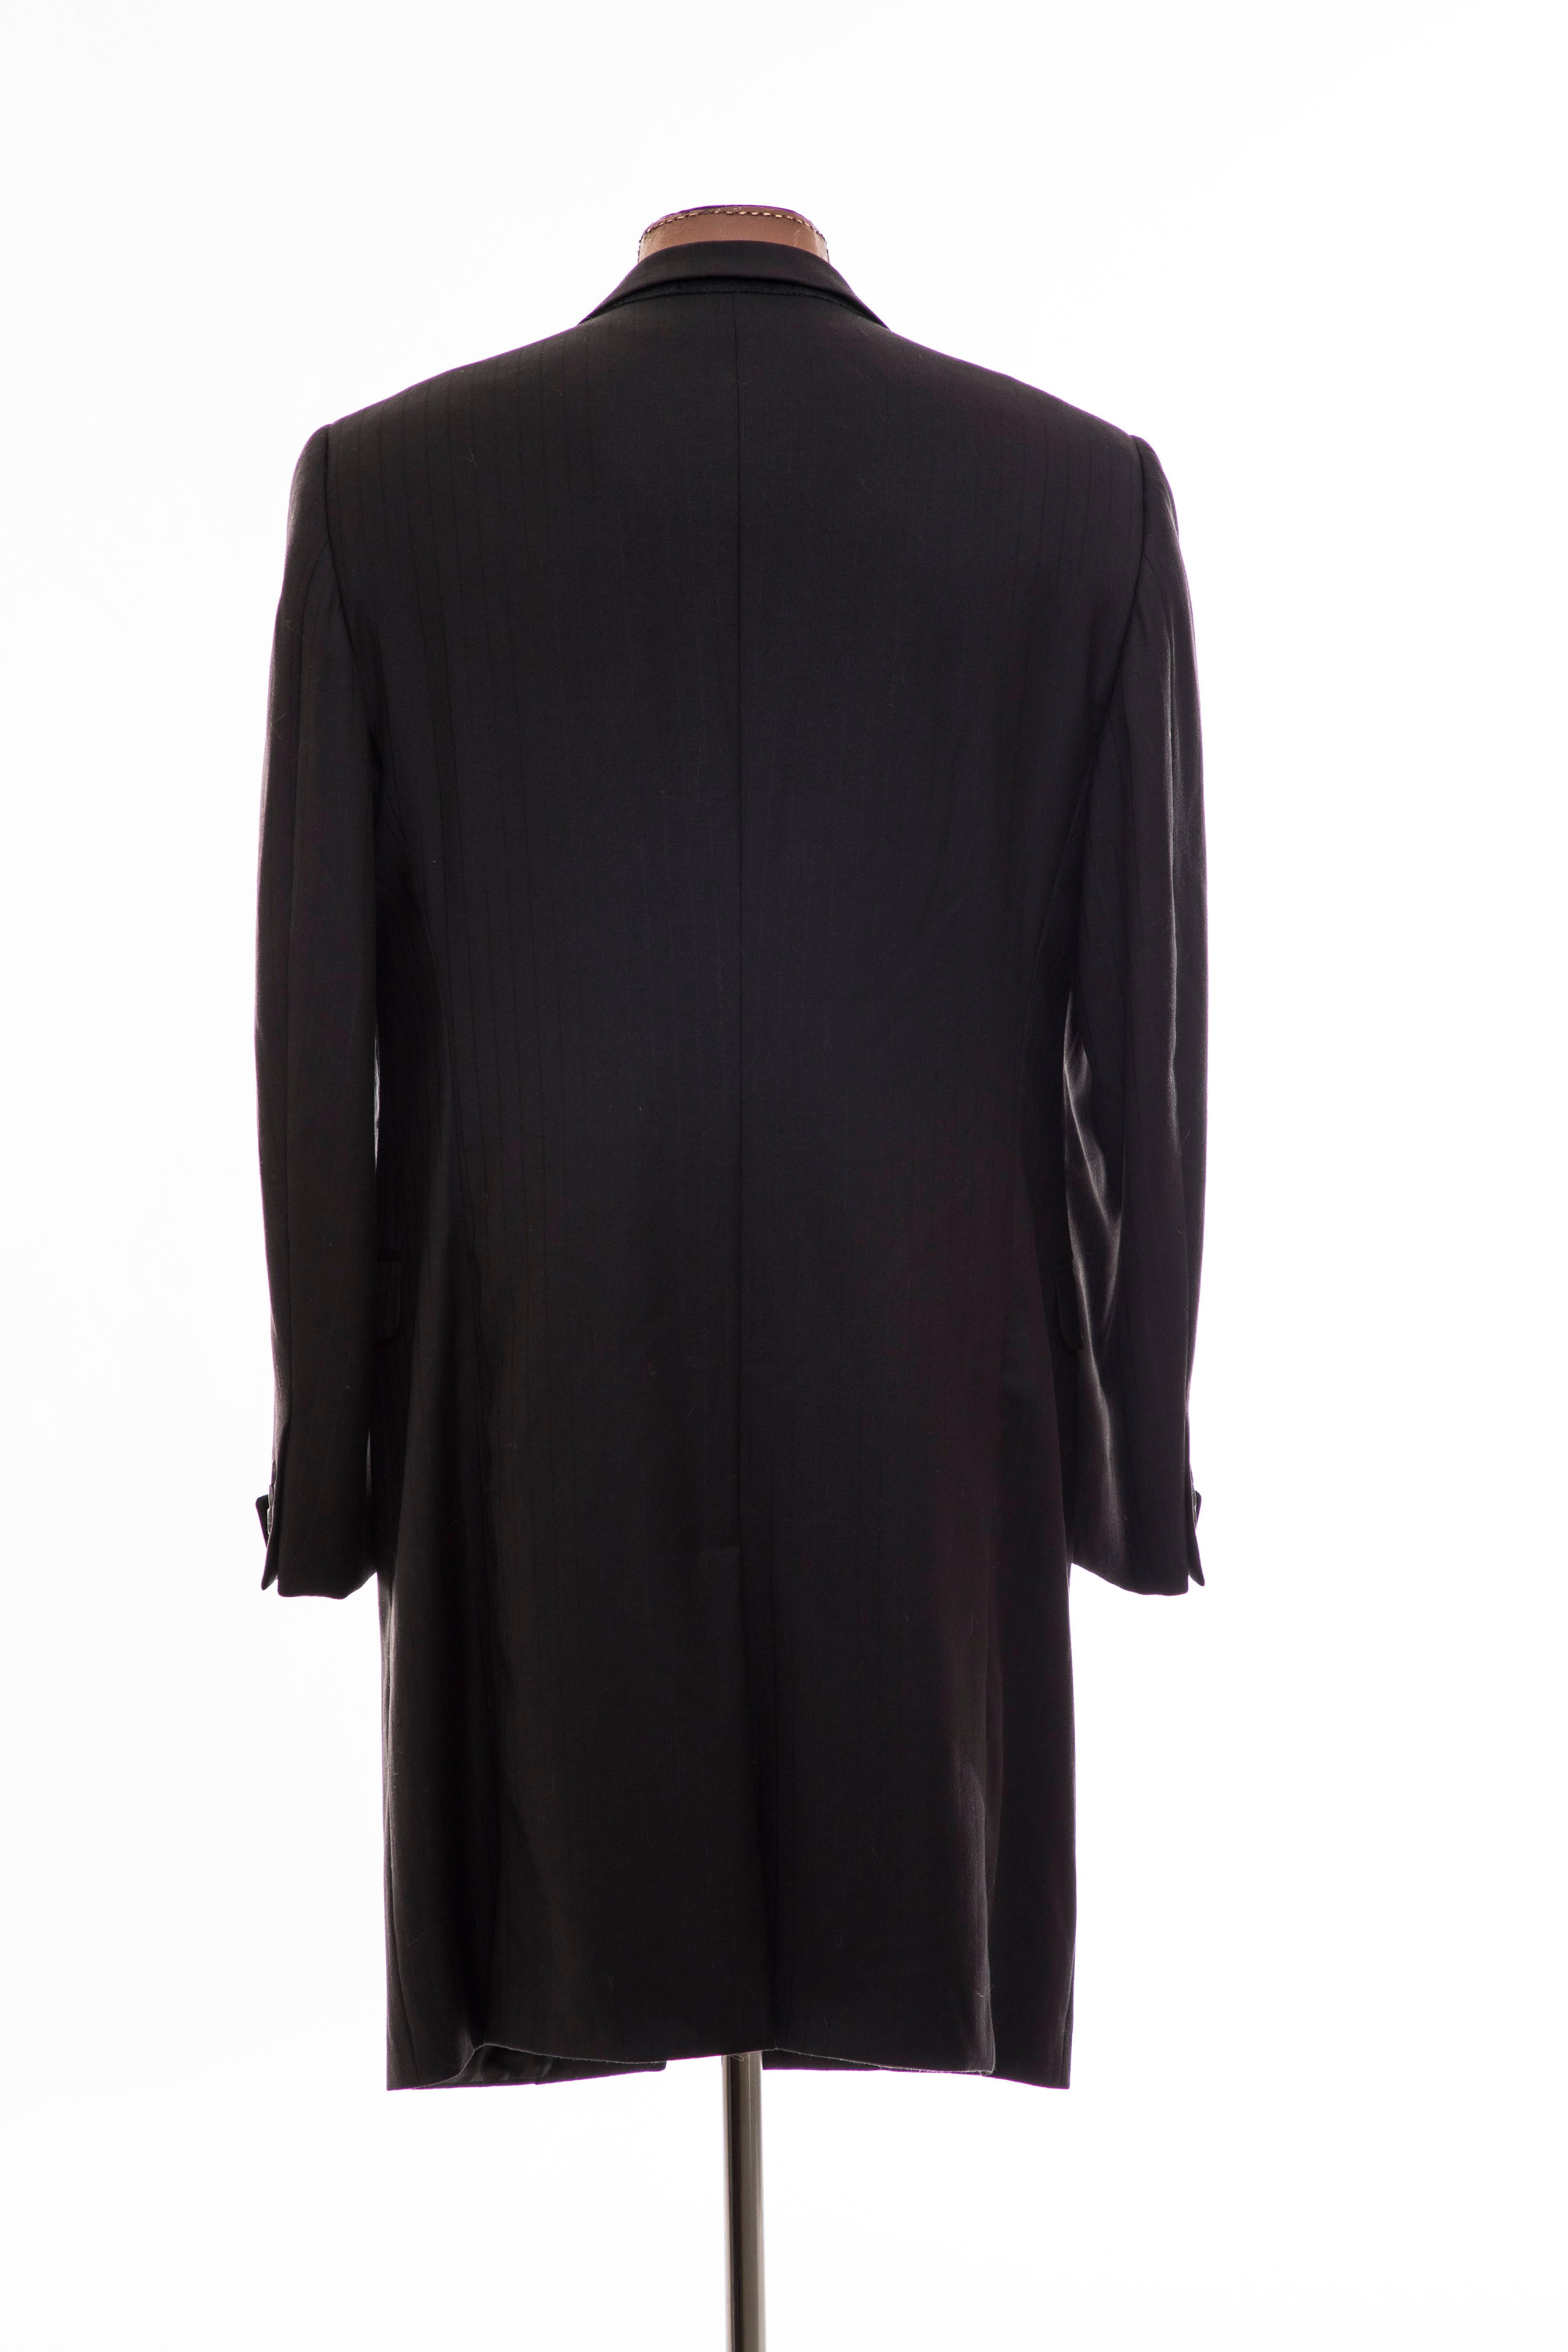 Gianni Versace Couture, circa 1990's black pinstriped wool men's overcoat with peak labels, cuffed sleeves, single hidden button closure, three interior pockets, back vent and fully lined. 

Chest 45, Waist 41, Hips 46, Shoulder 19, Sleeve 27.5,